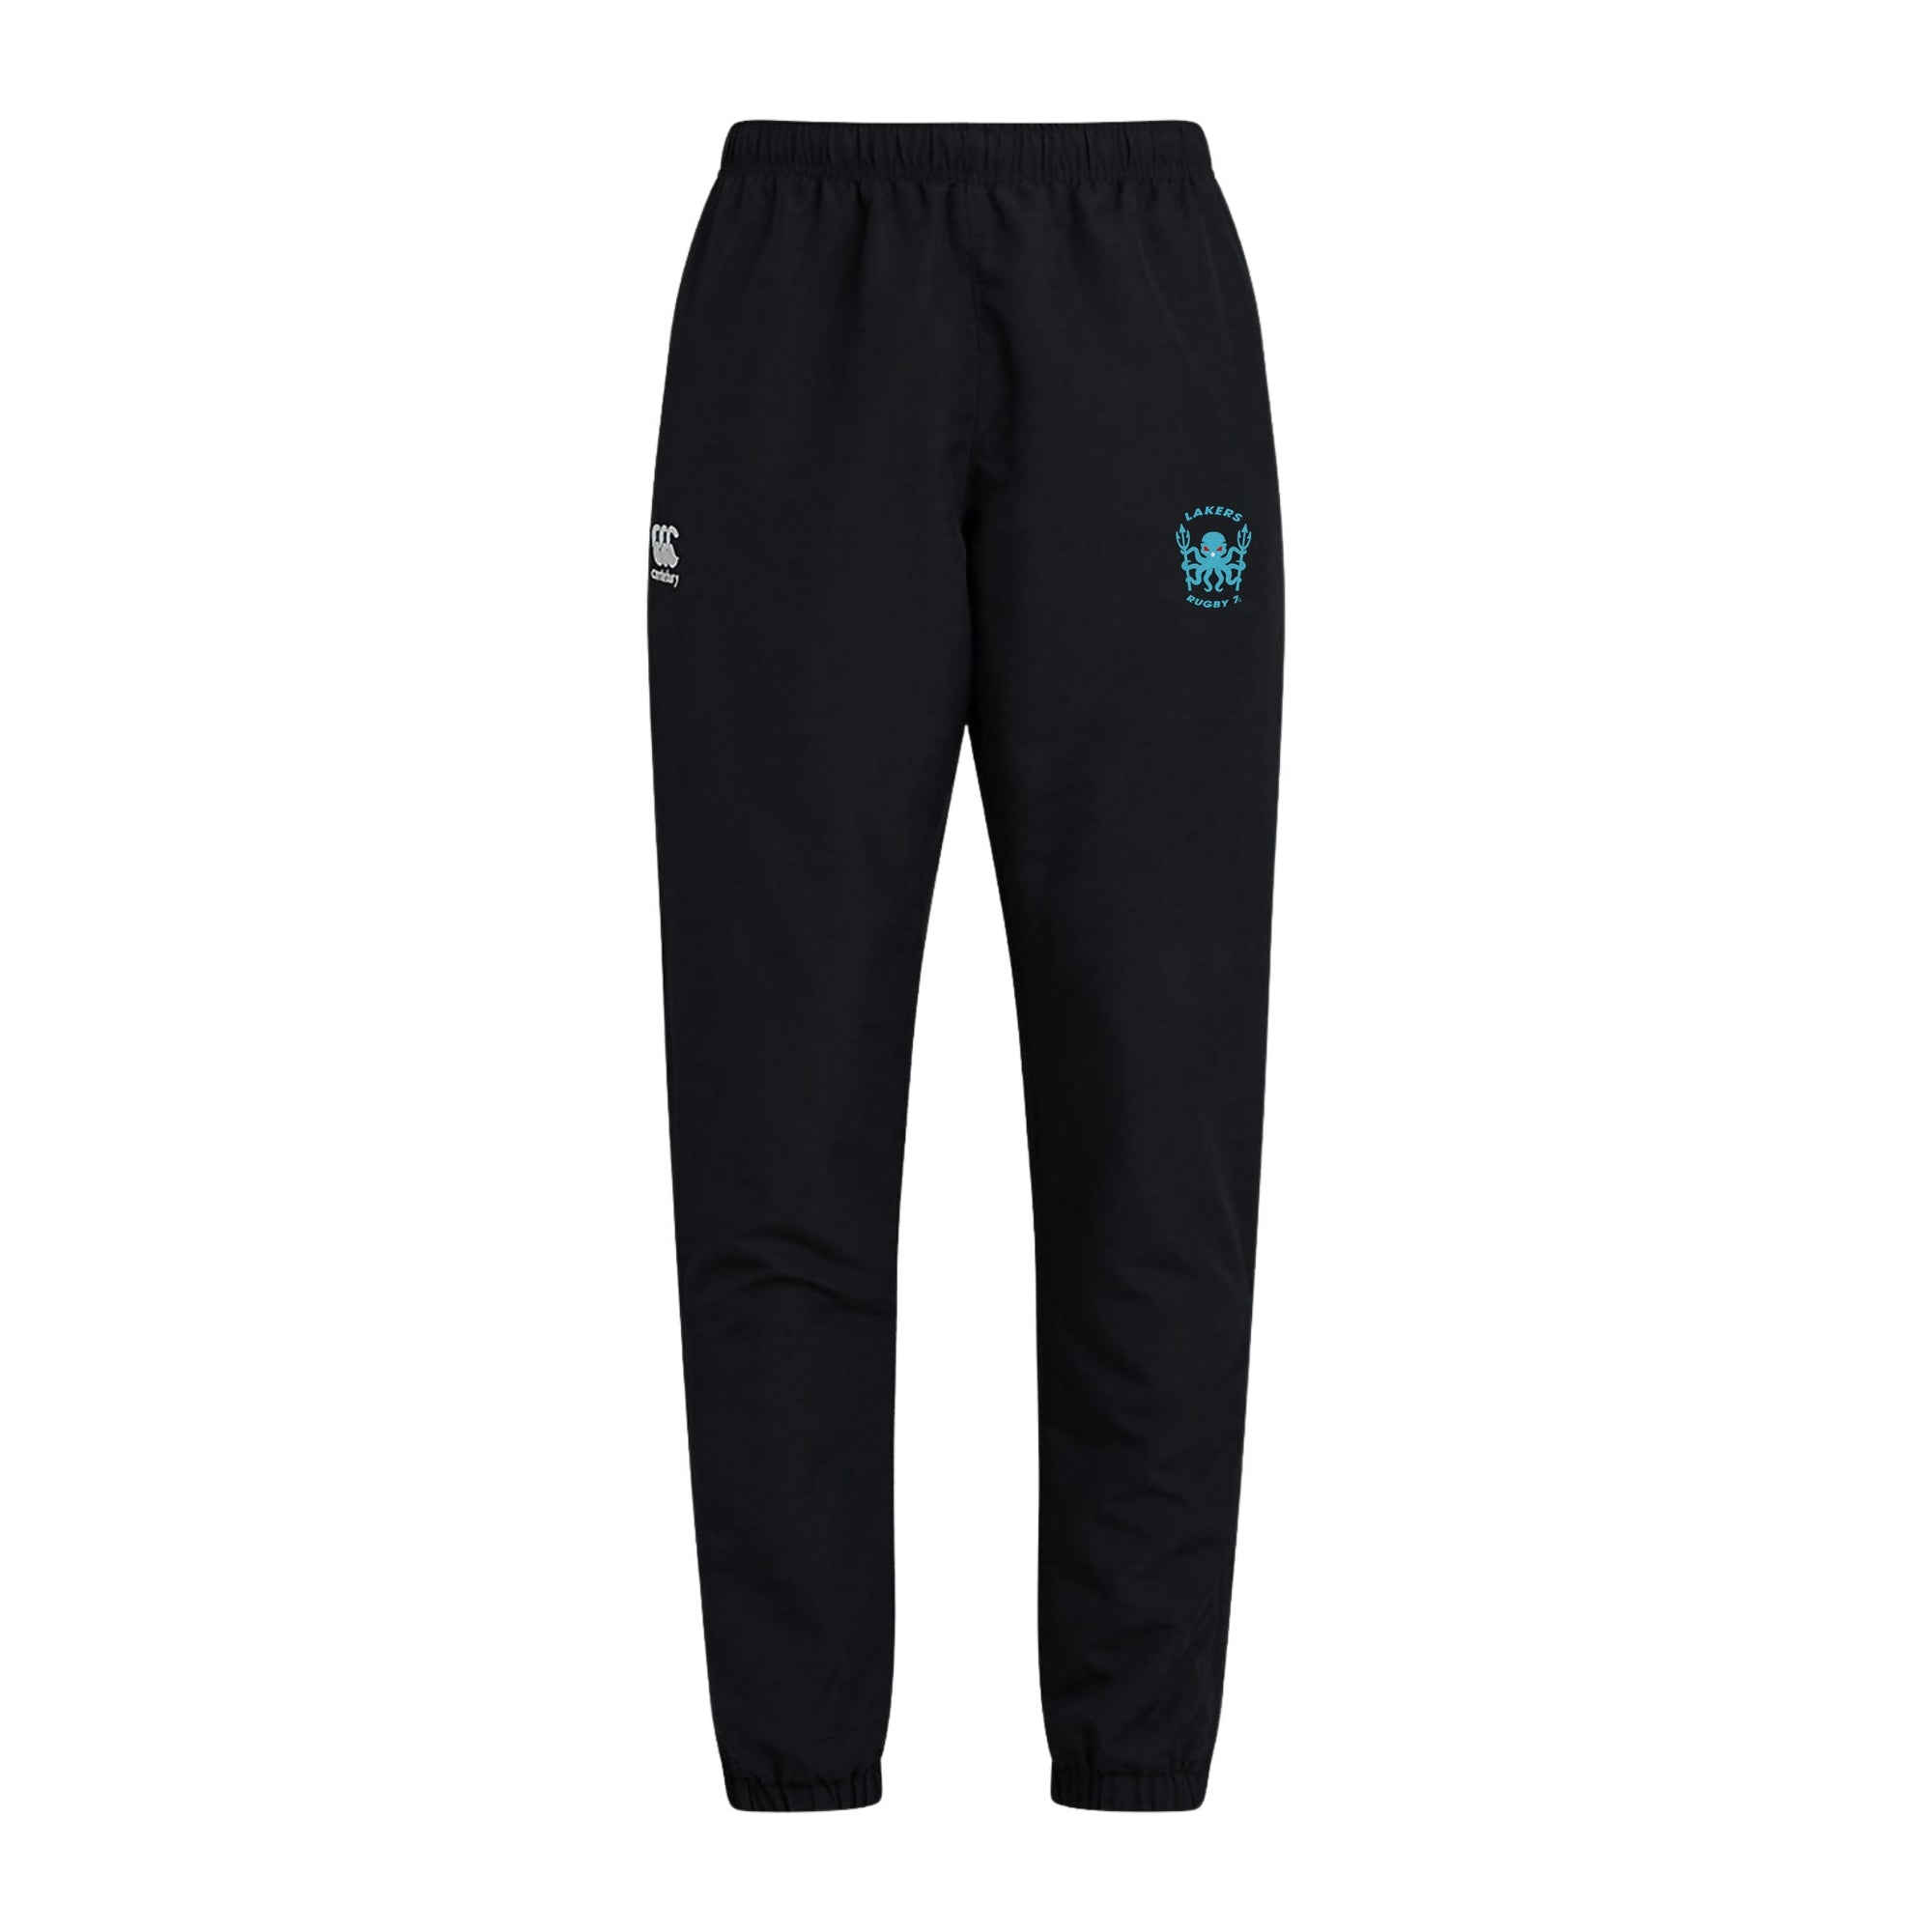 Rugby Imports Lakers Rugby 7s CCC Track Pant